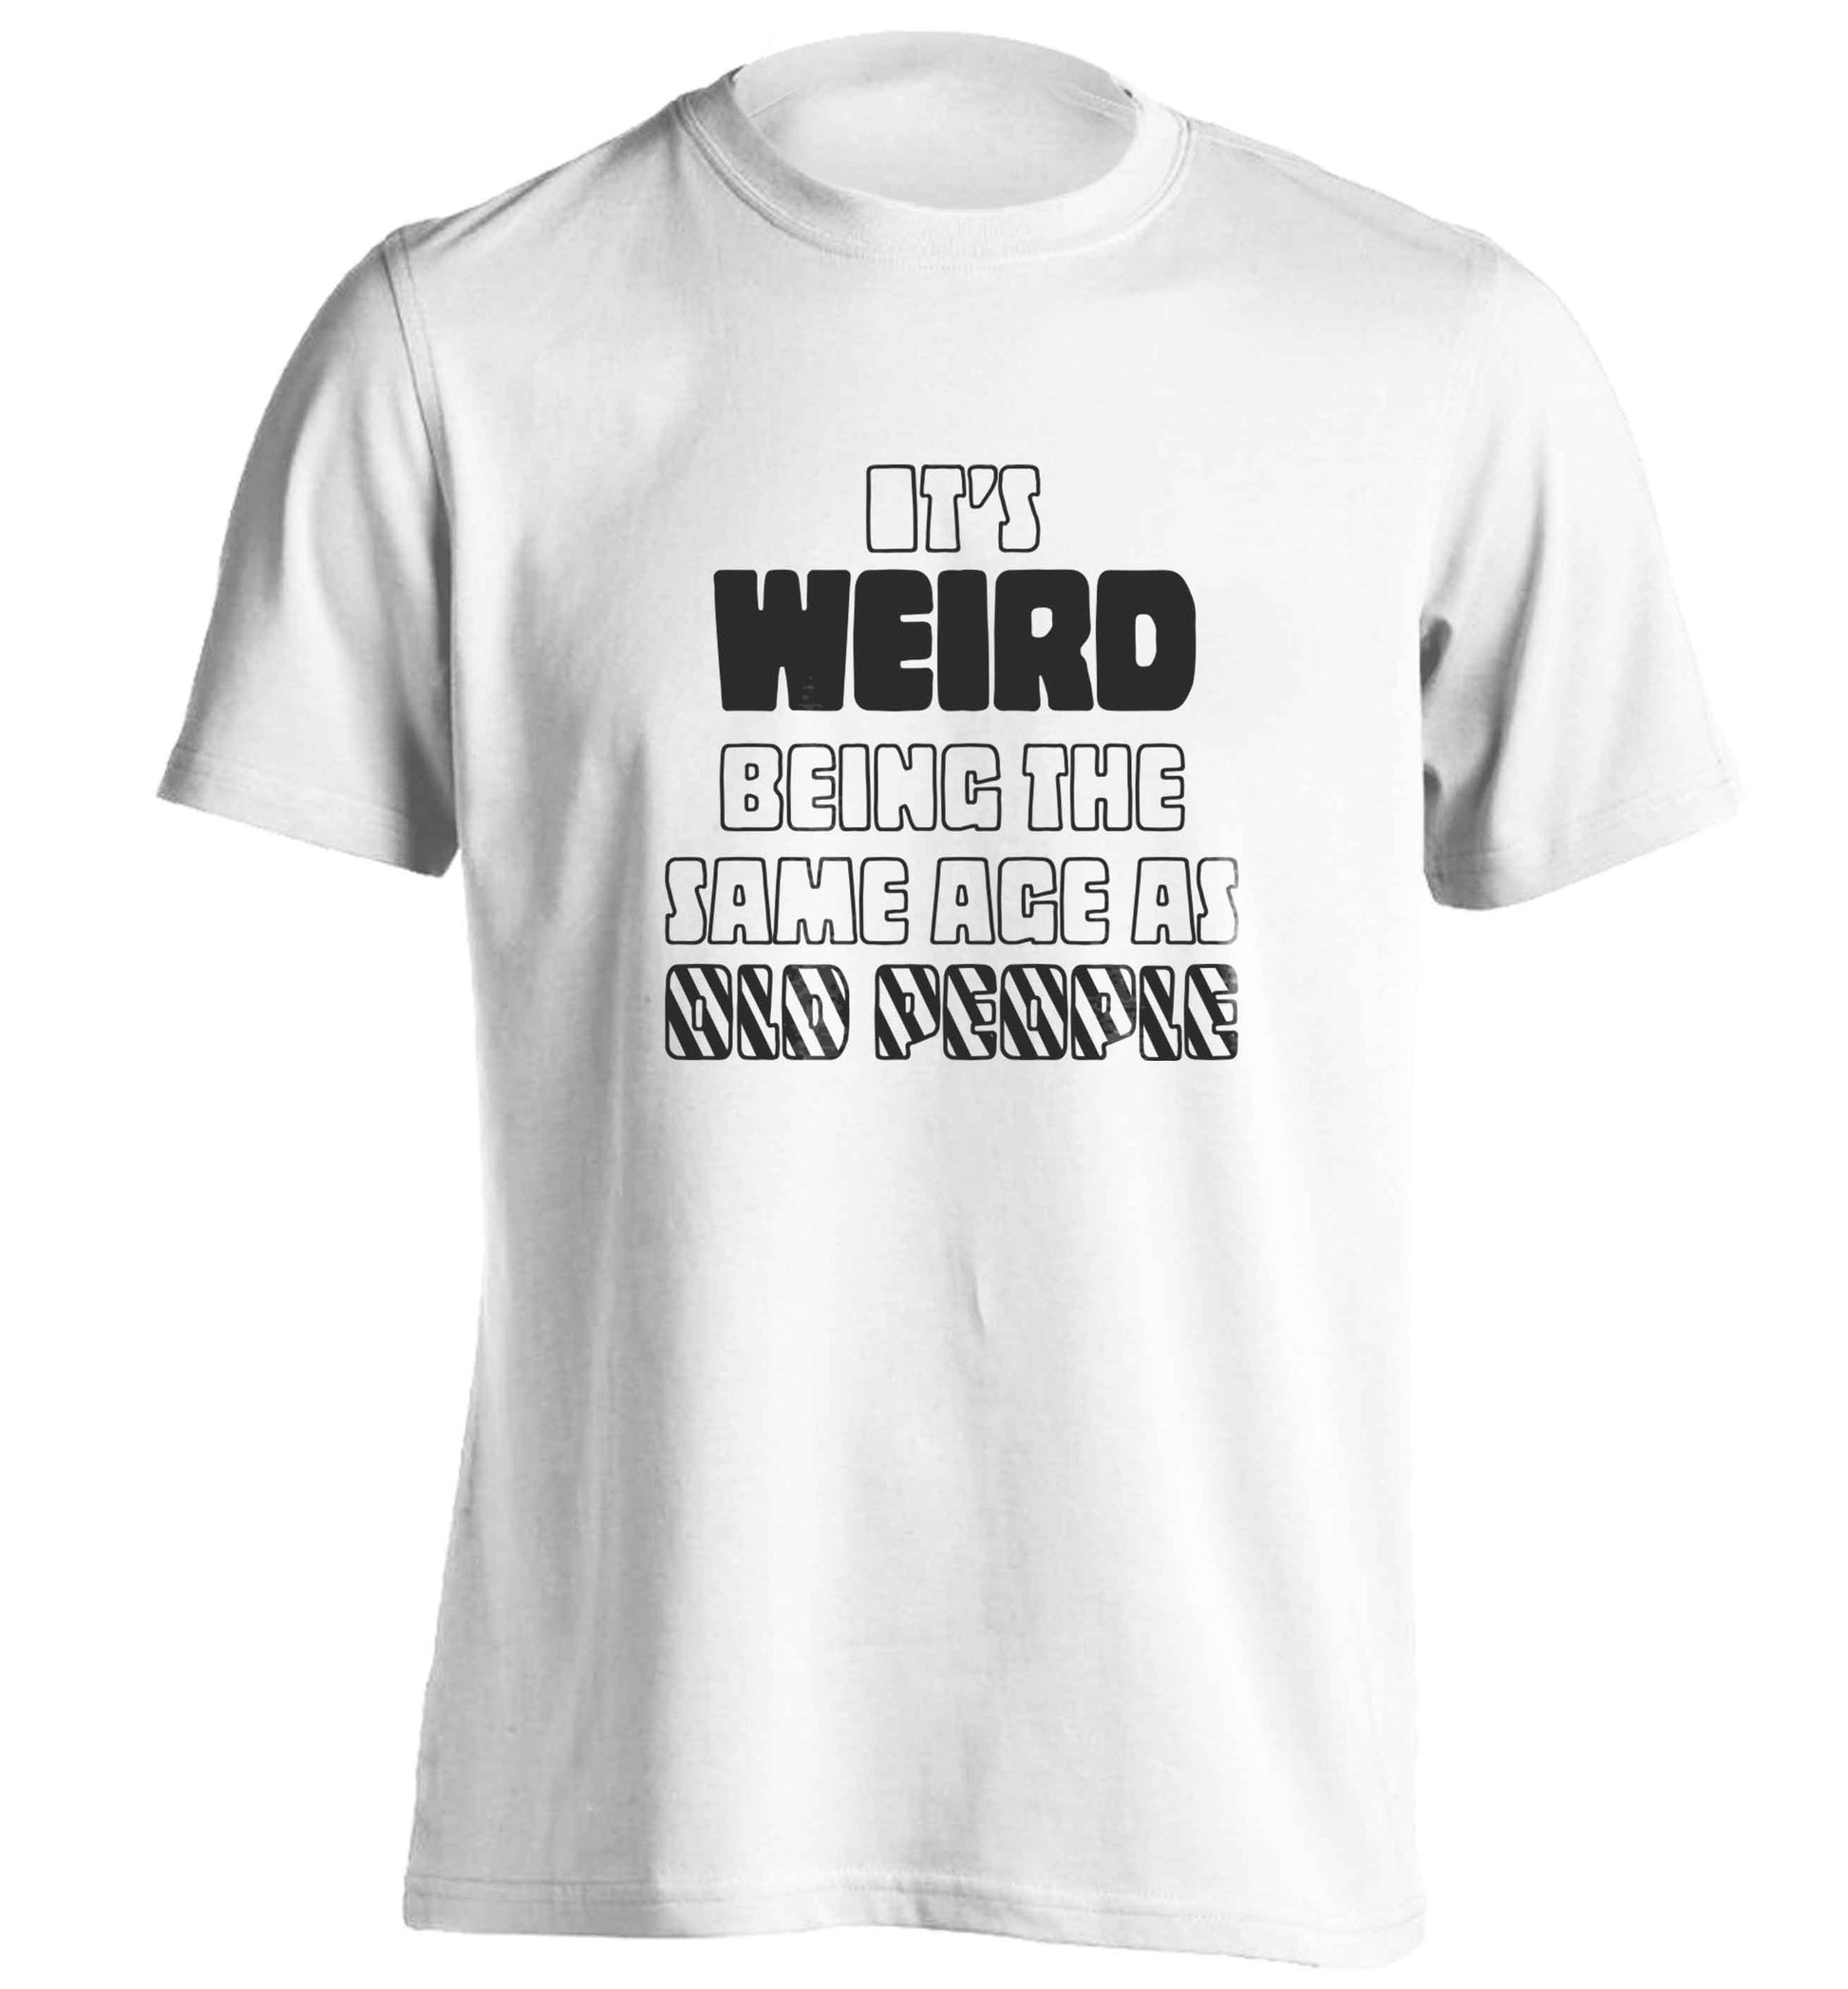 It's weird being the same age as old people adults unisex white Tshirt 2XL